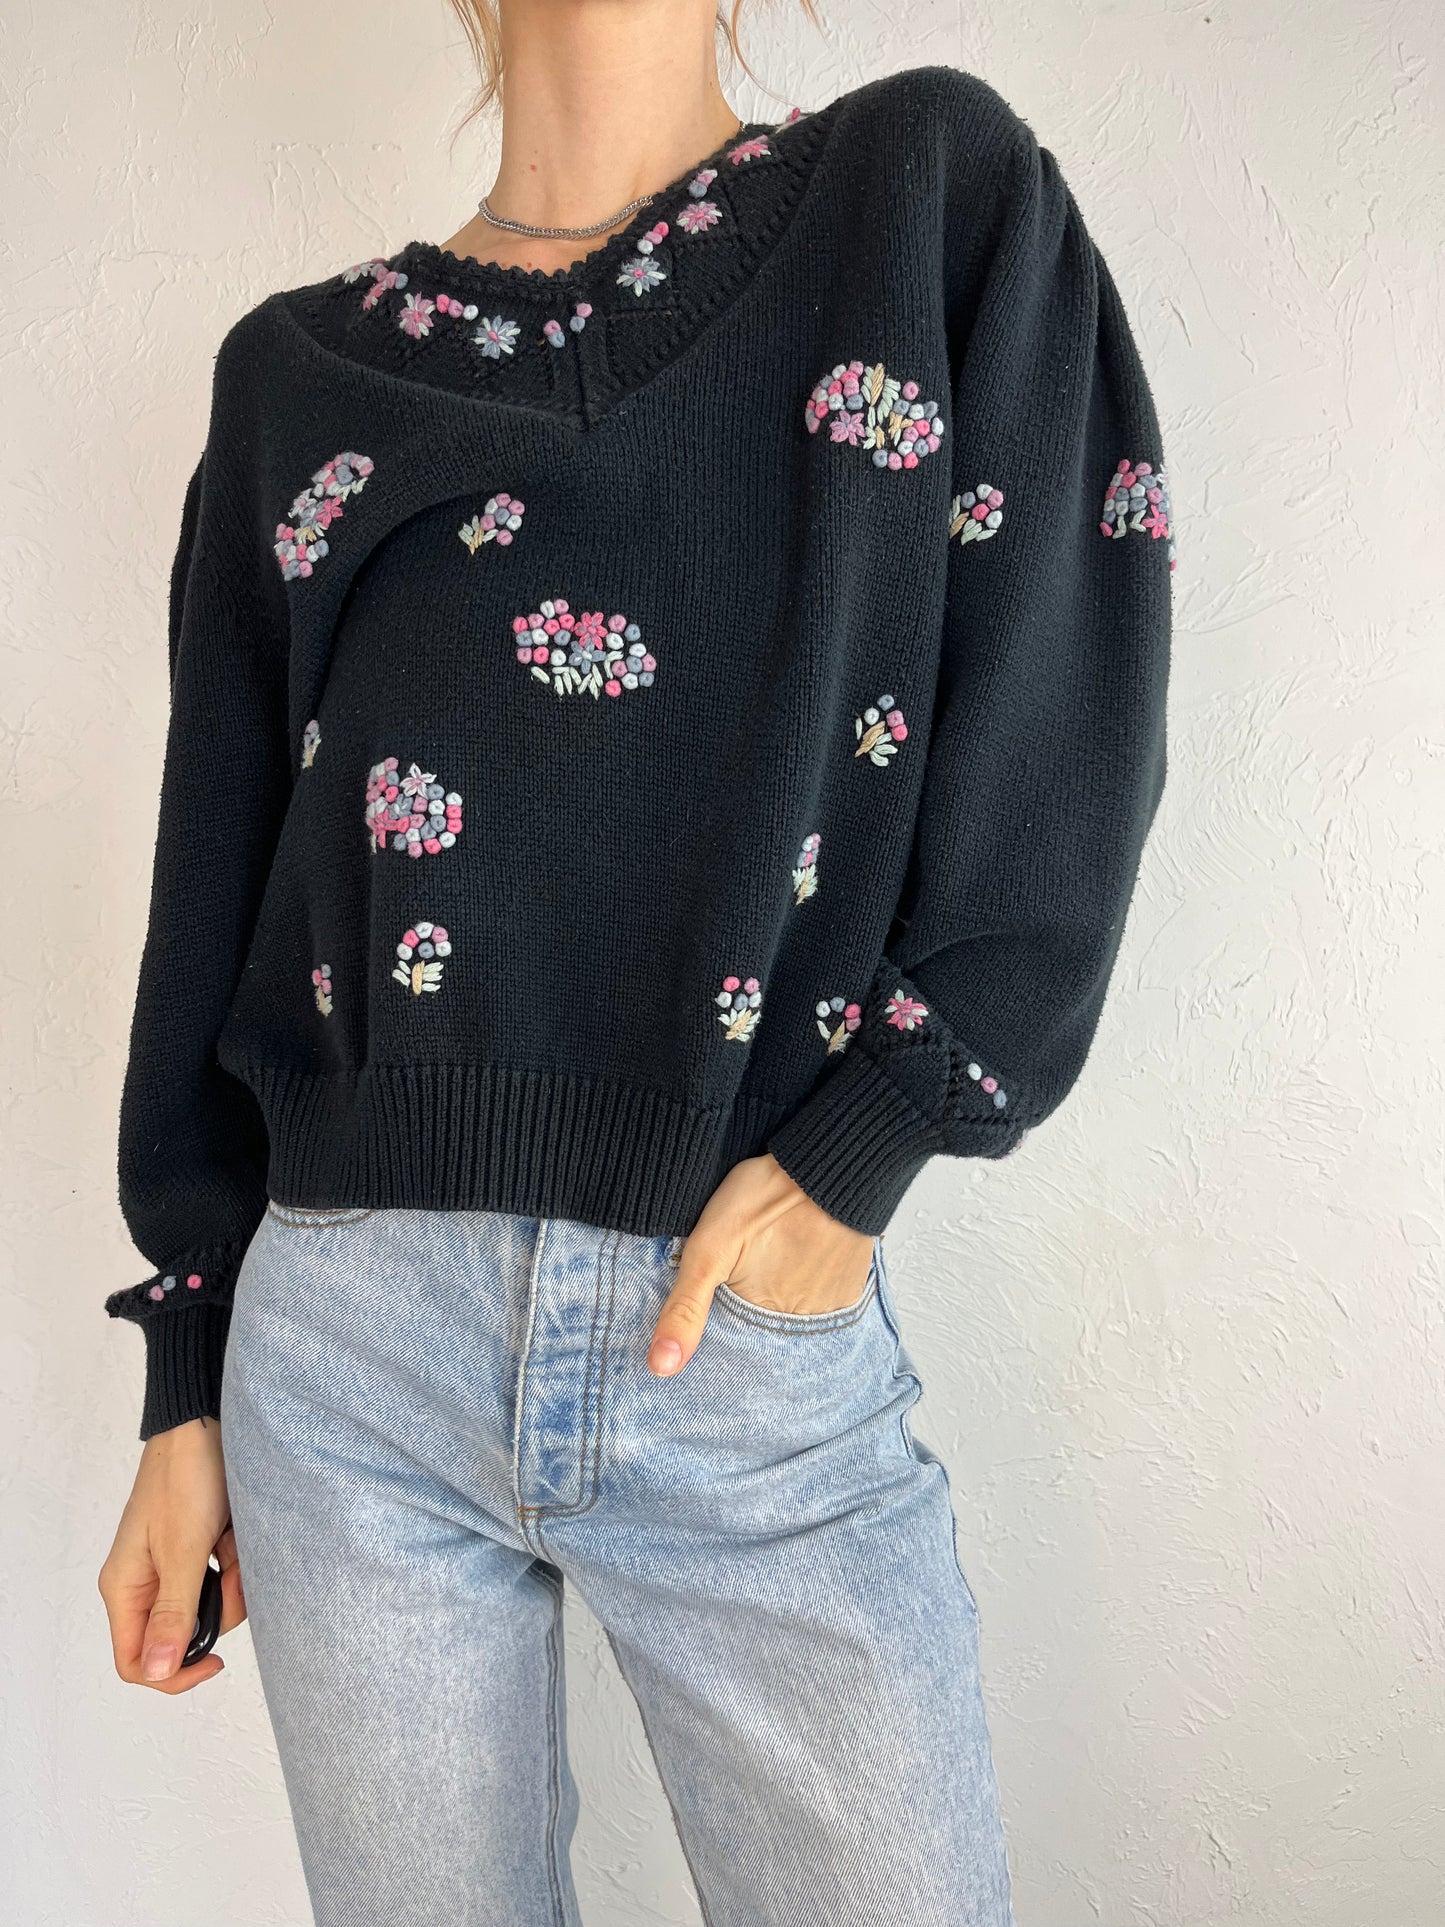 90s 'Maggie' Black Floral Cotton Knit Pullover Sweater / Large